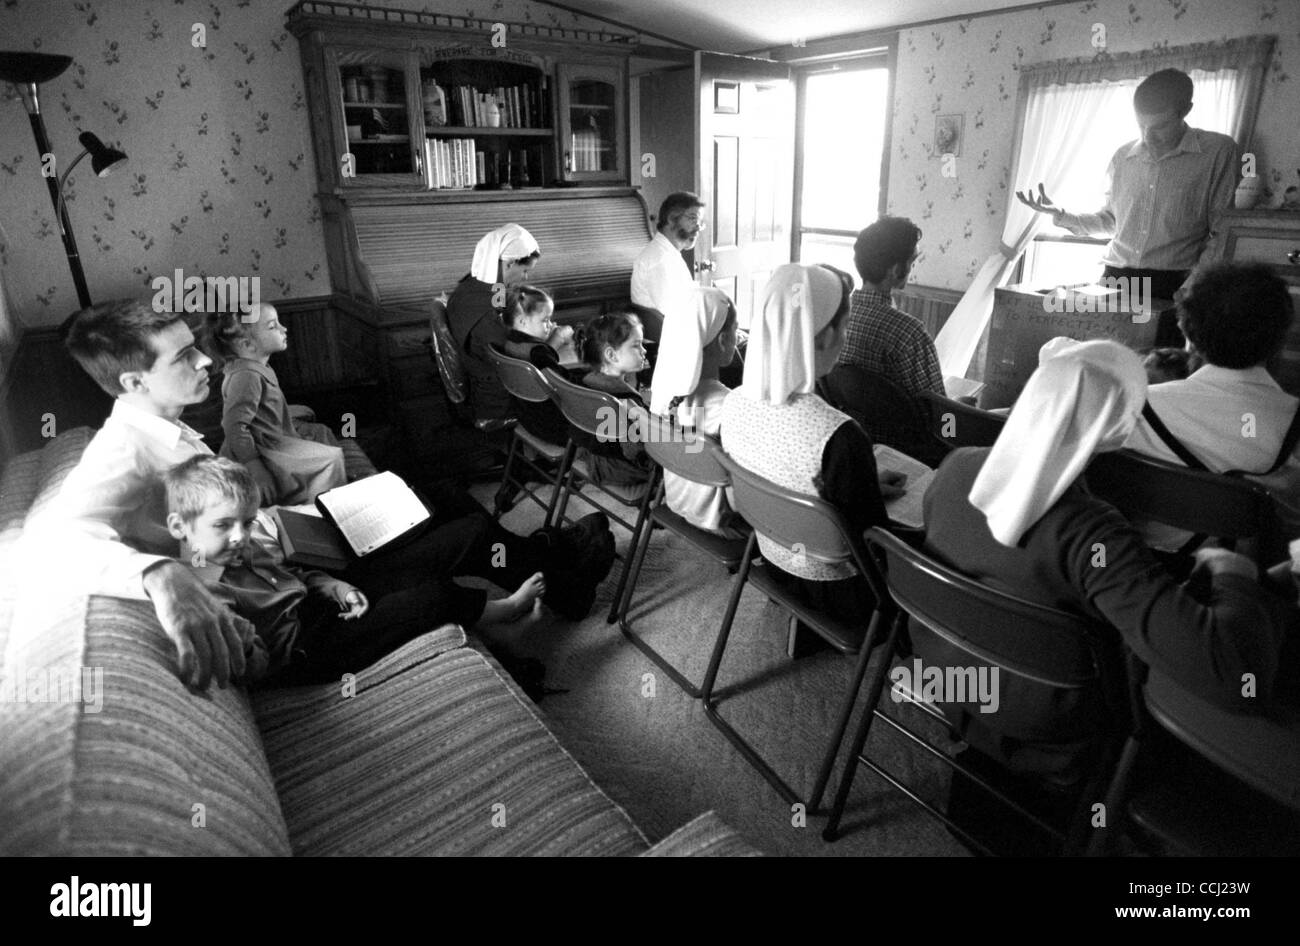 Jul. 22, 2003 - Arthur, Illinois, U.S. - DANIEL HELMUTH sits with his son SAMUEL HELMUTH, at left, during a Sunday service attended by other excommunicated Amish in his brother Paul's, home. The Old Order has excommunicated and shunned many of its members due to disagreements on acceptable practices Stock Photo